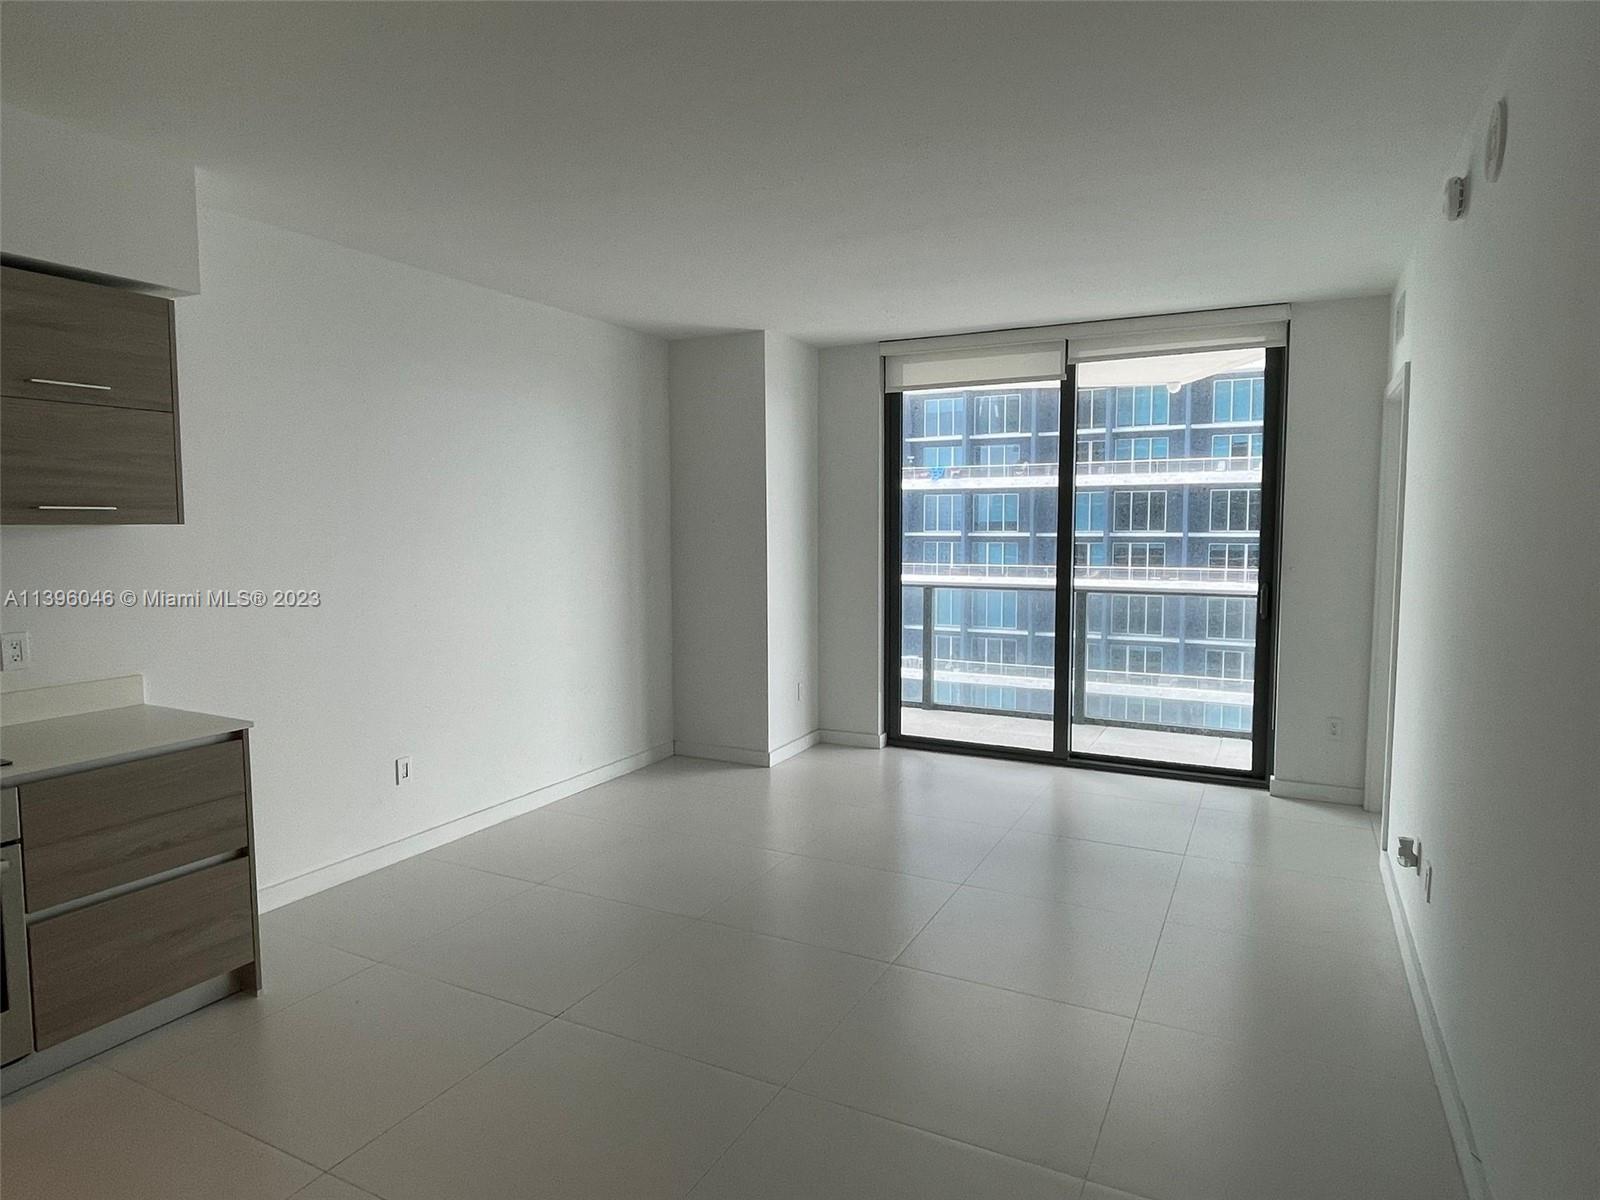 Unit 1 bed and 1.5 bath. 
SLS Brickell, luxuty building in the heart of Brickell.